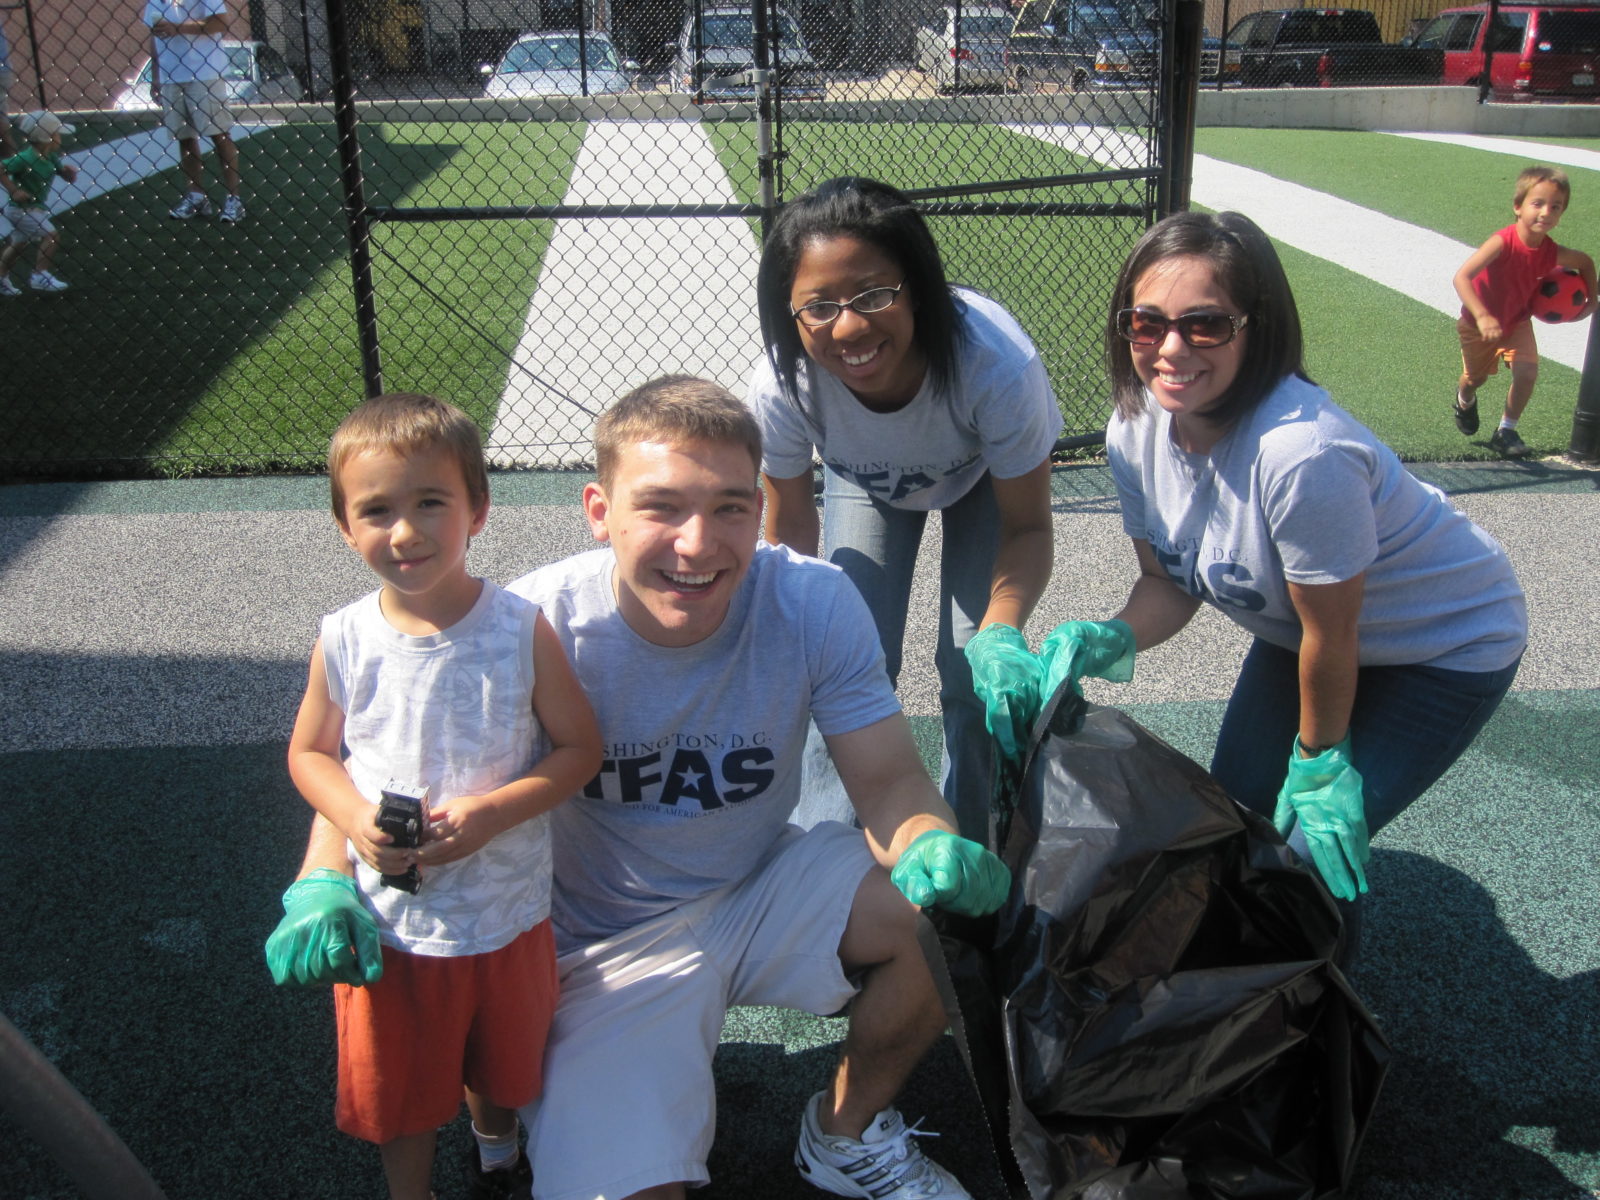 Students and alumni from various institutes helped clean Ross Elementary School for a service project during Alumni Weekend.